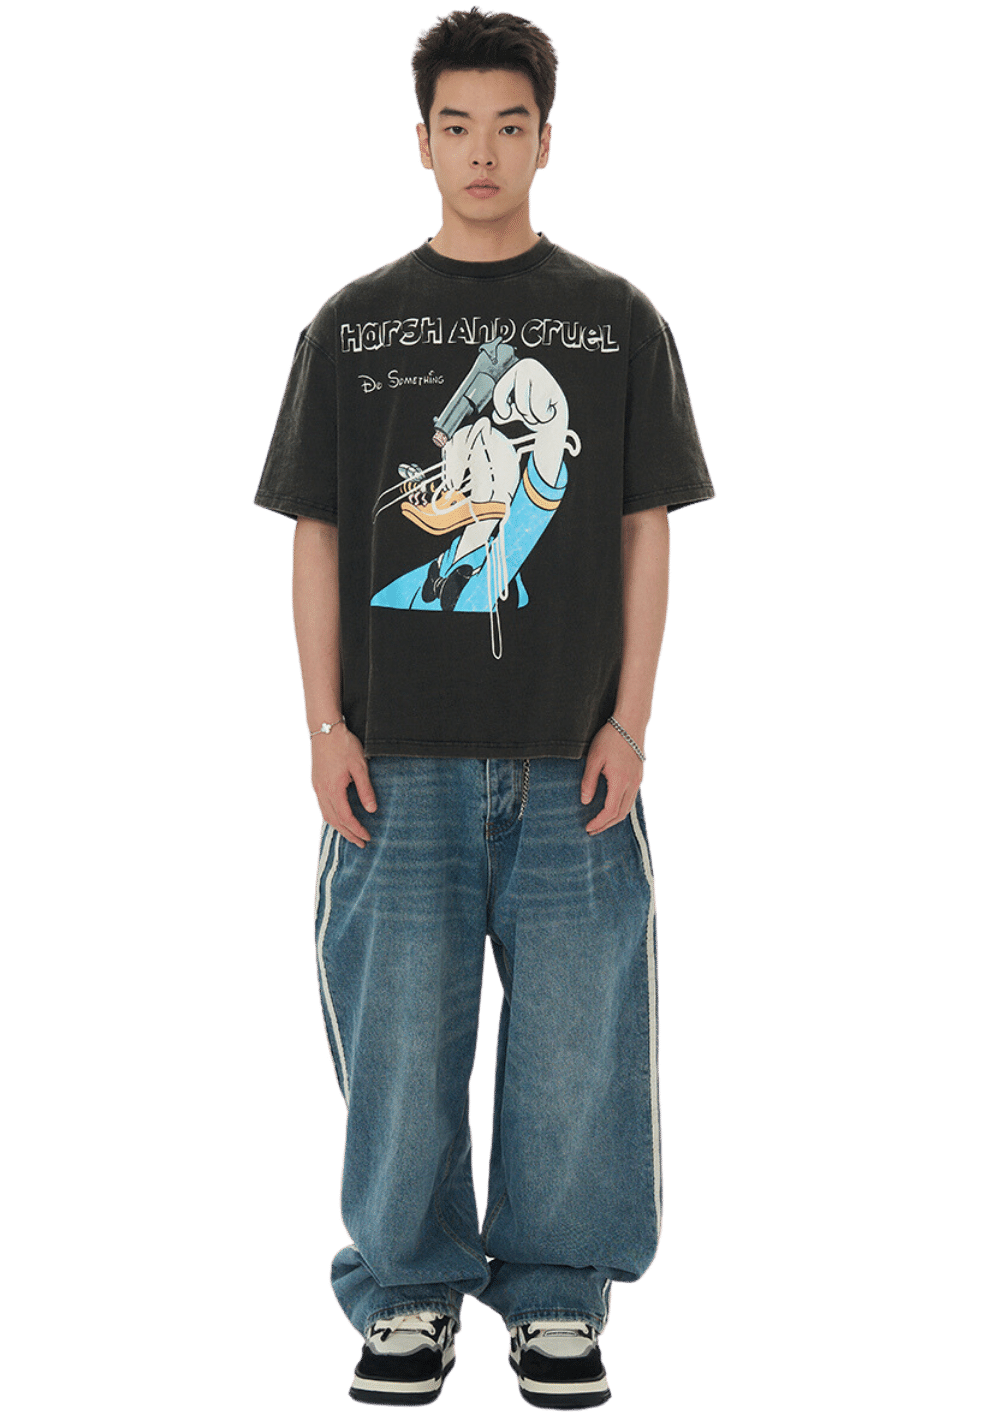 Heavy Duty Spoof Duck Distressed T-Shirt - PSYLOS 1, Heavy Duty Spoof Duck Distressed T-Shirt, T-Shirt, HARSH AND CRUEL, PSYLOS 1